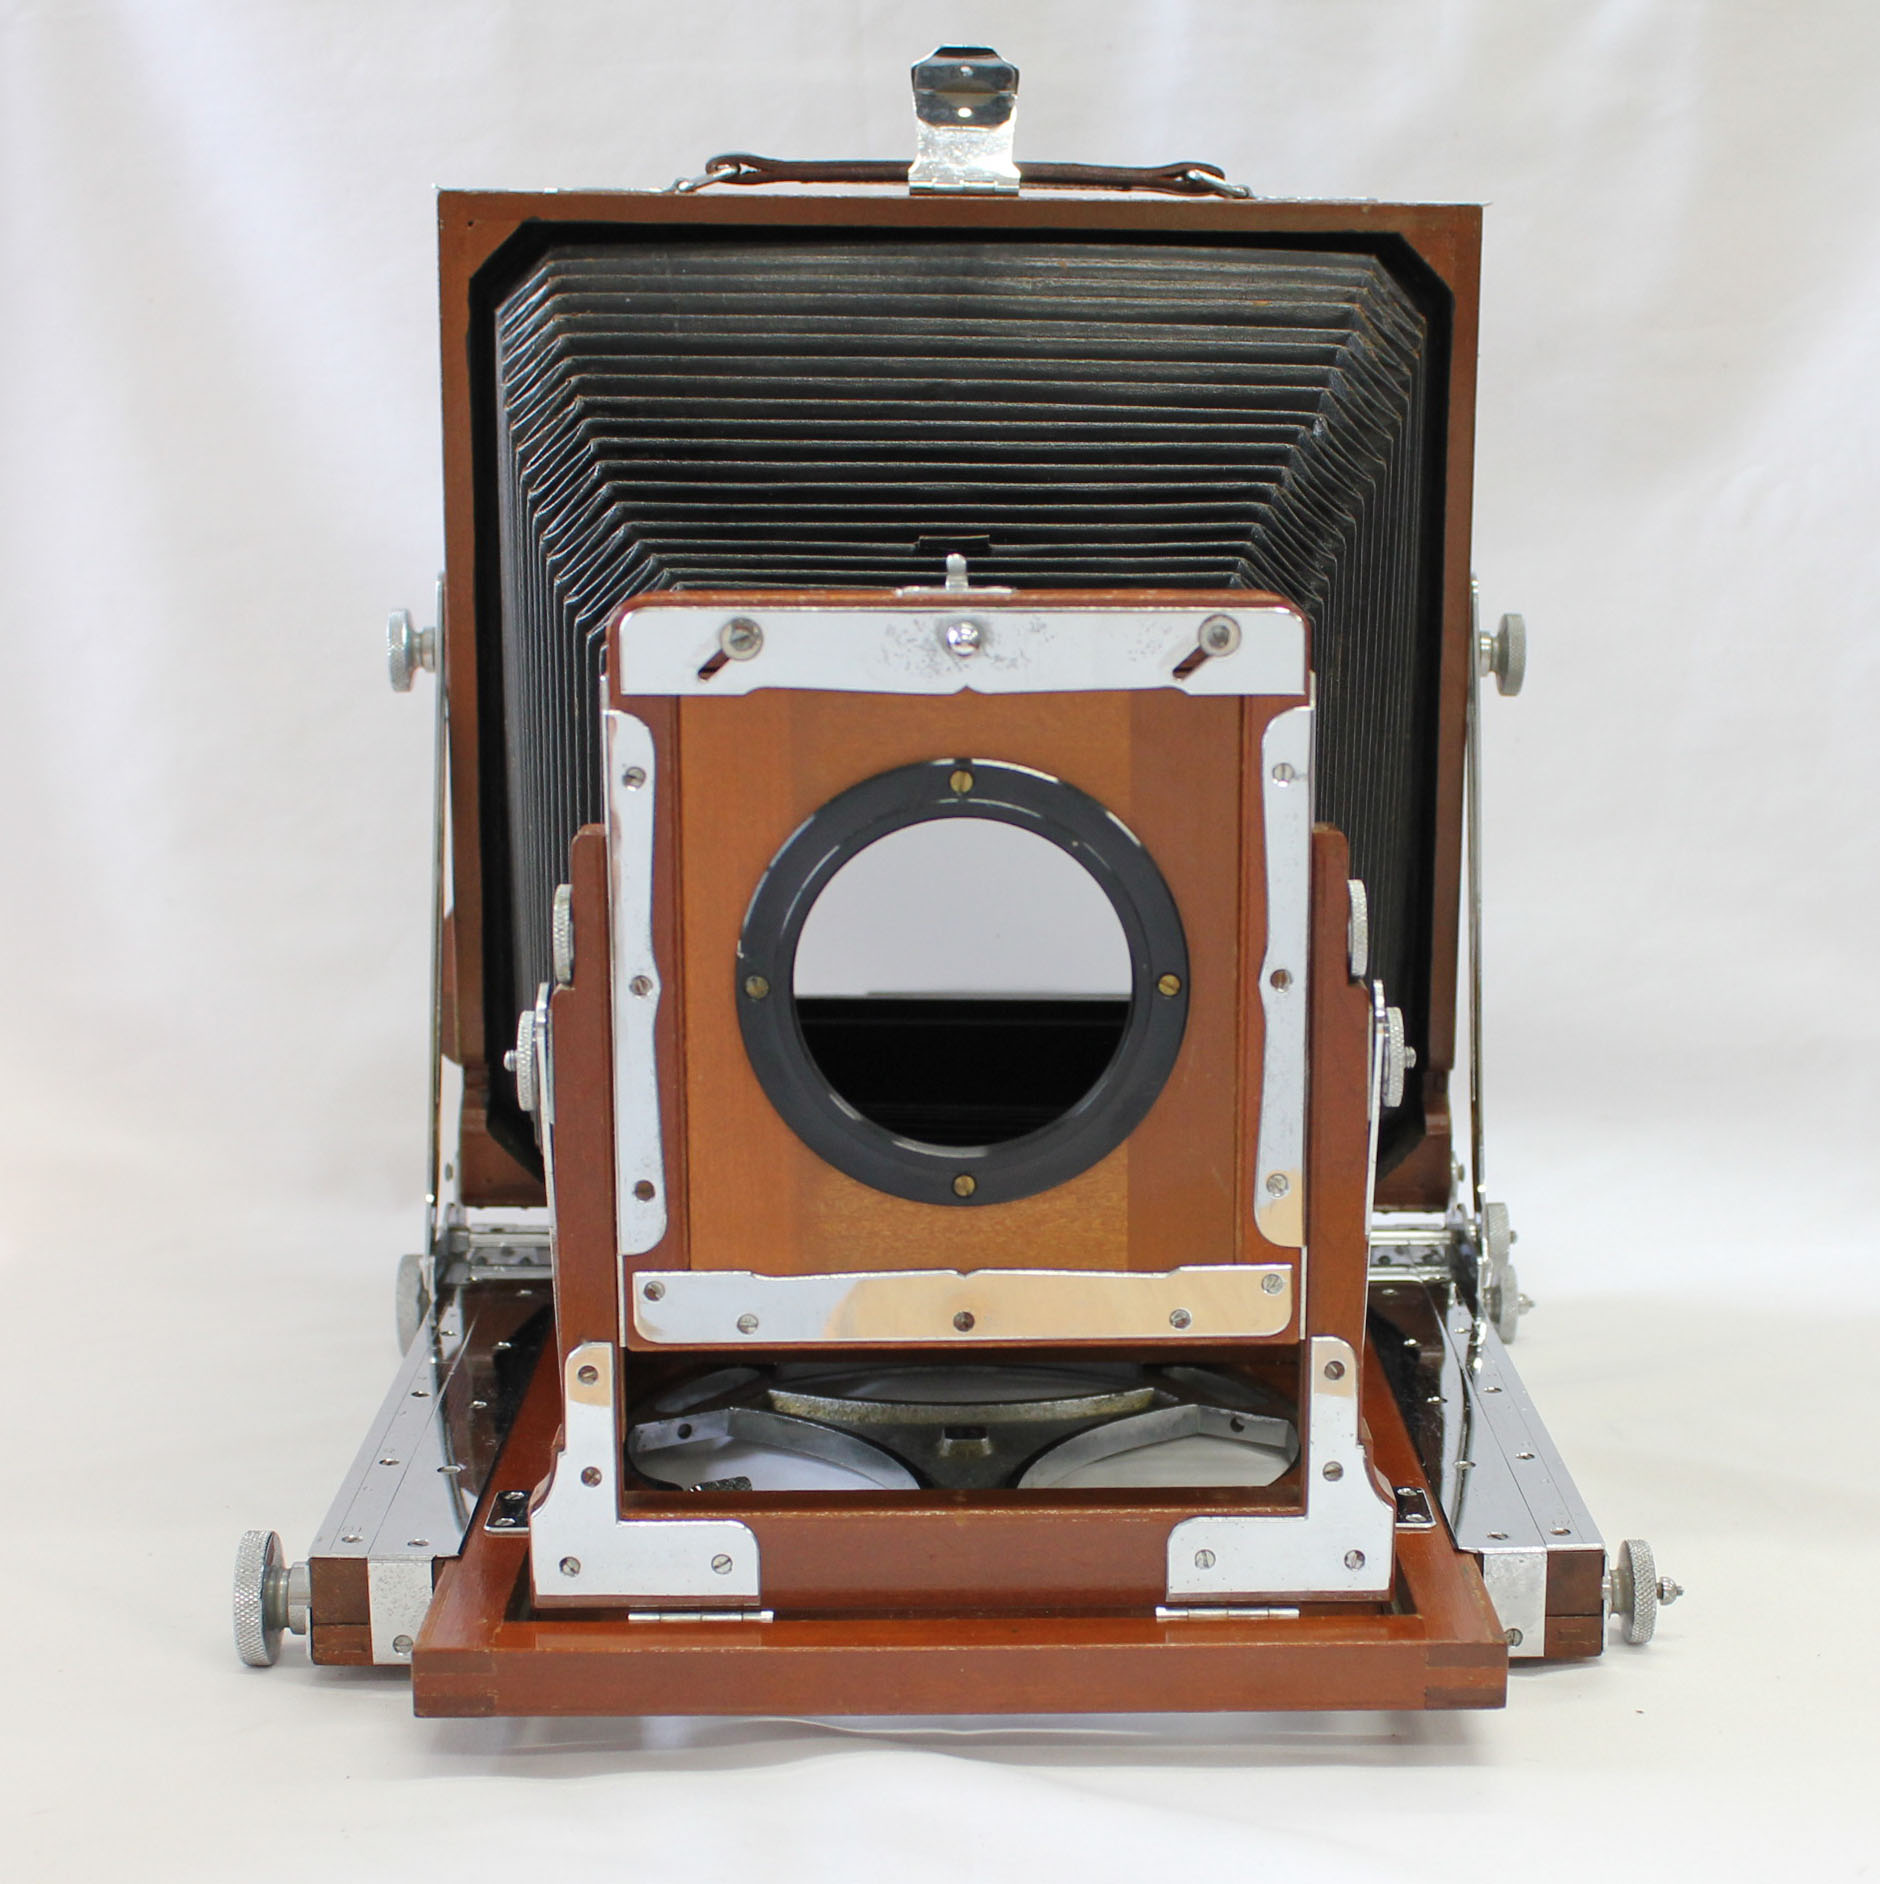  Tachihara Hope A STF 6 1/2x8 1/2 6.5x8.5inch 165x216mm Wood Field Camera with 8 Cut Film Holder from Japan Photo 5